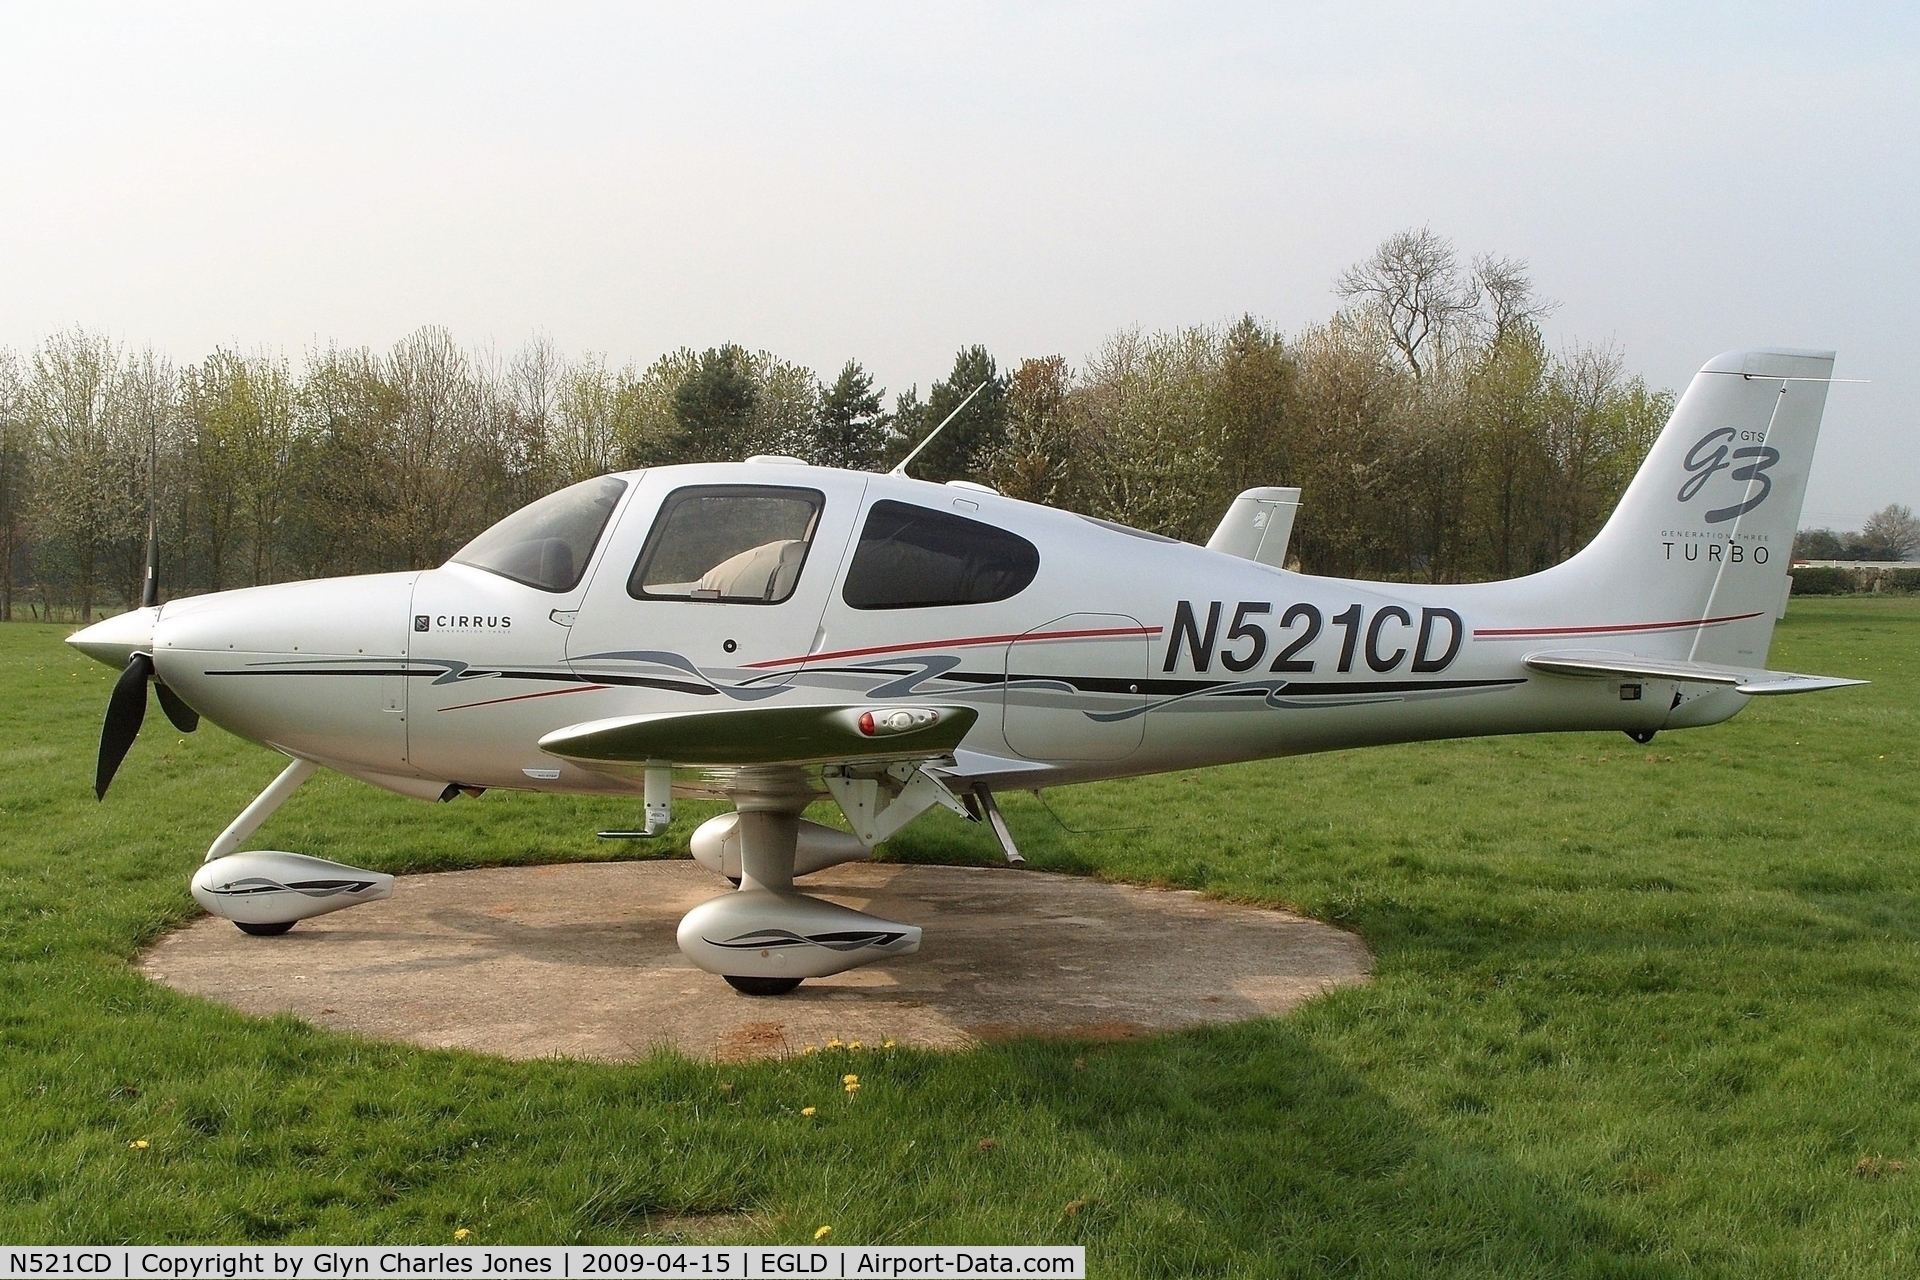 N521CD, 2007 Cirrus SR22 G3 GTS Turbo C/N 2441, Owned by Assegai Aviation Inc Trustee. With thanks to The Pilot Centre for authority to take this photo.